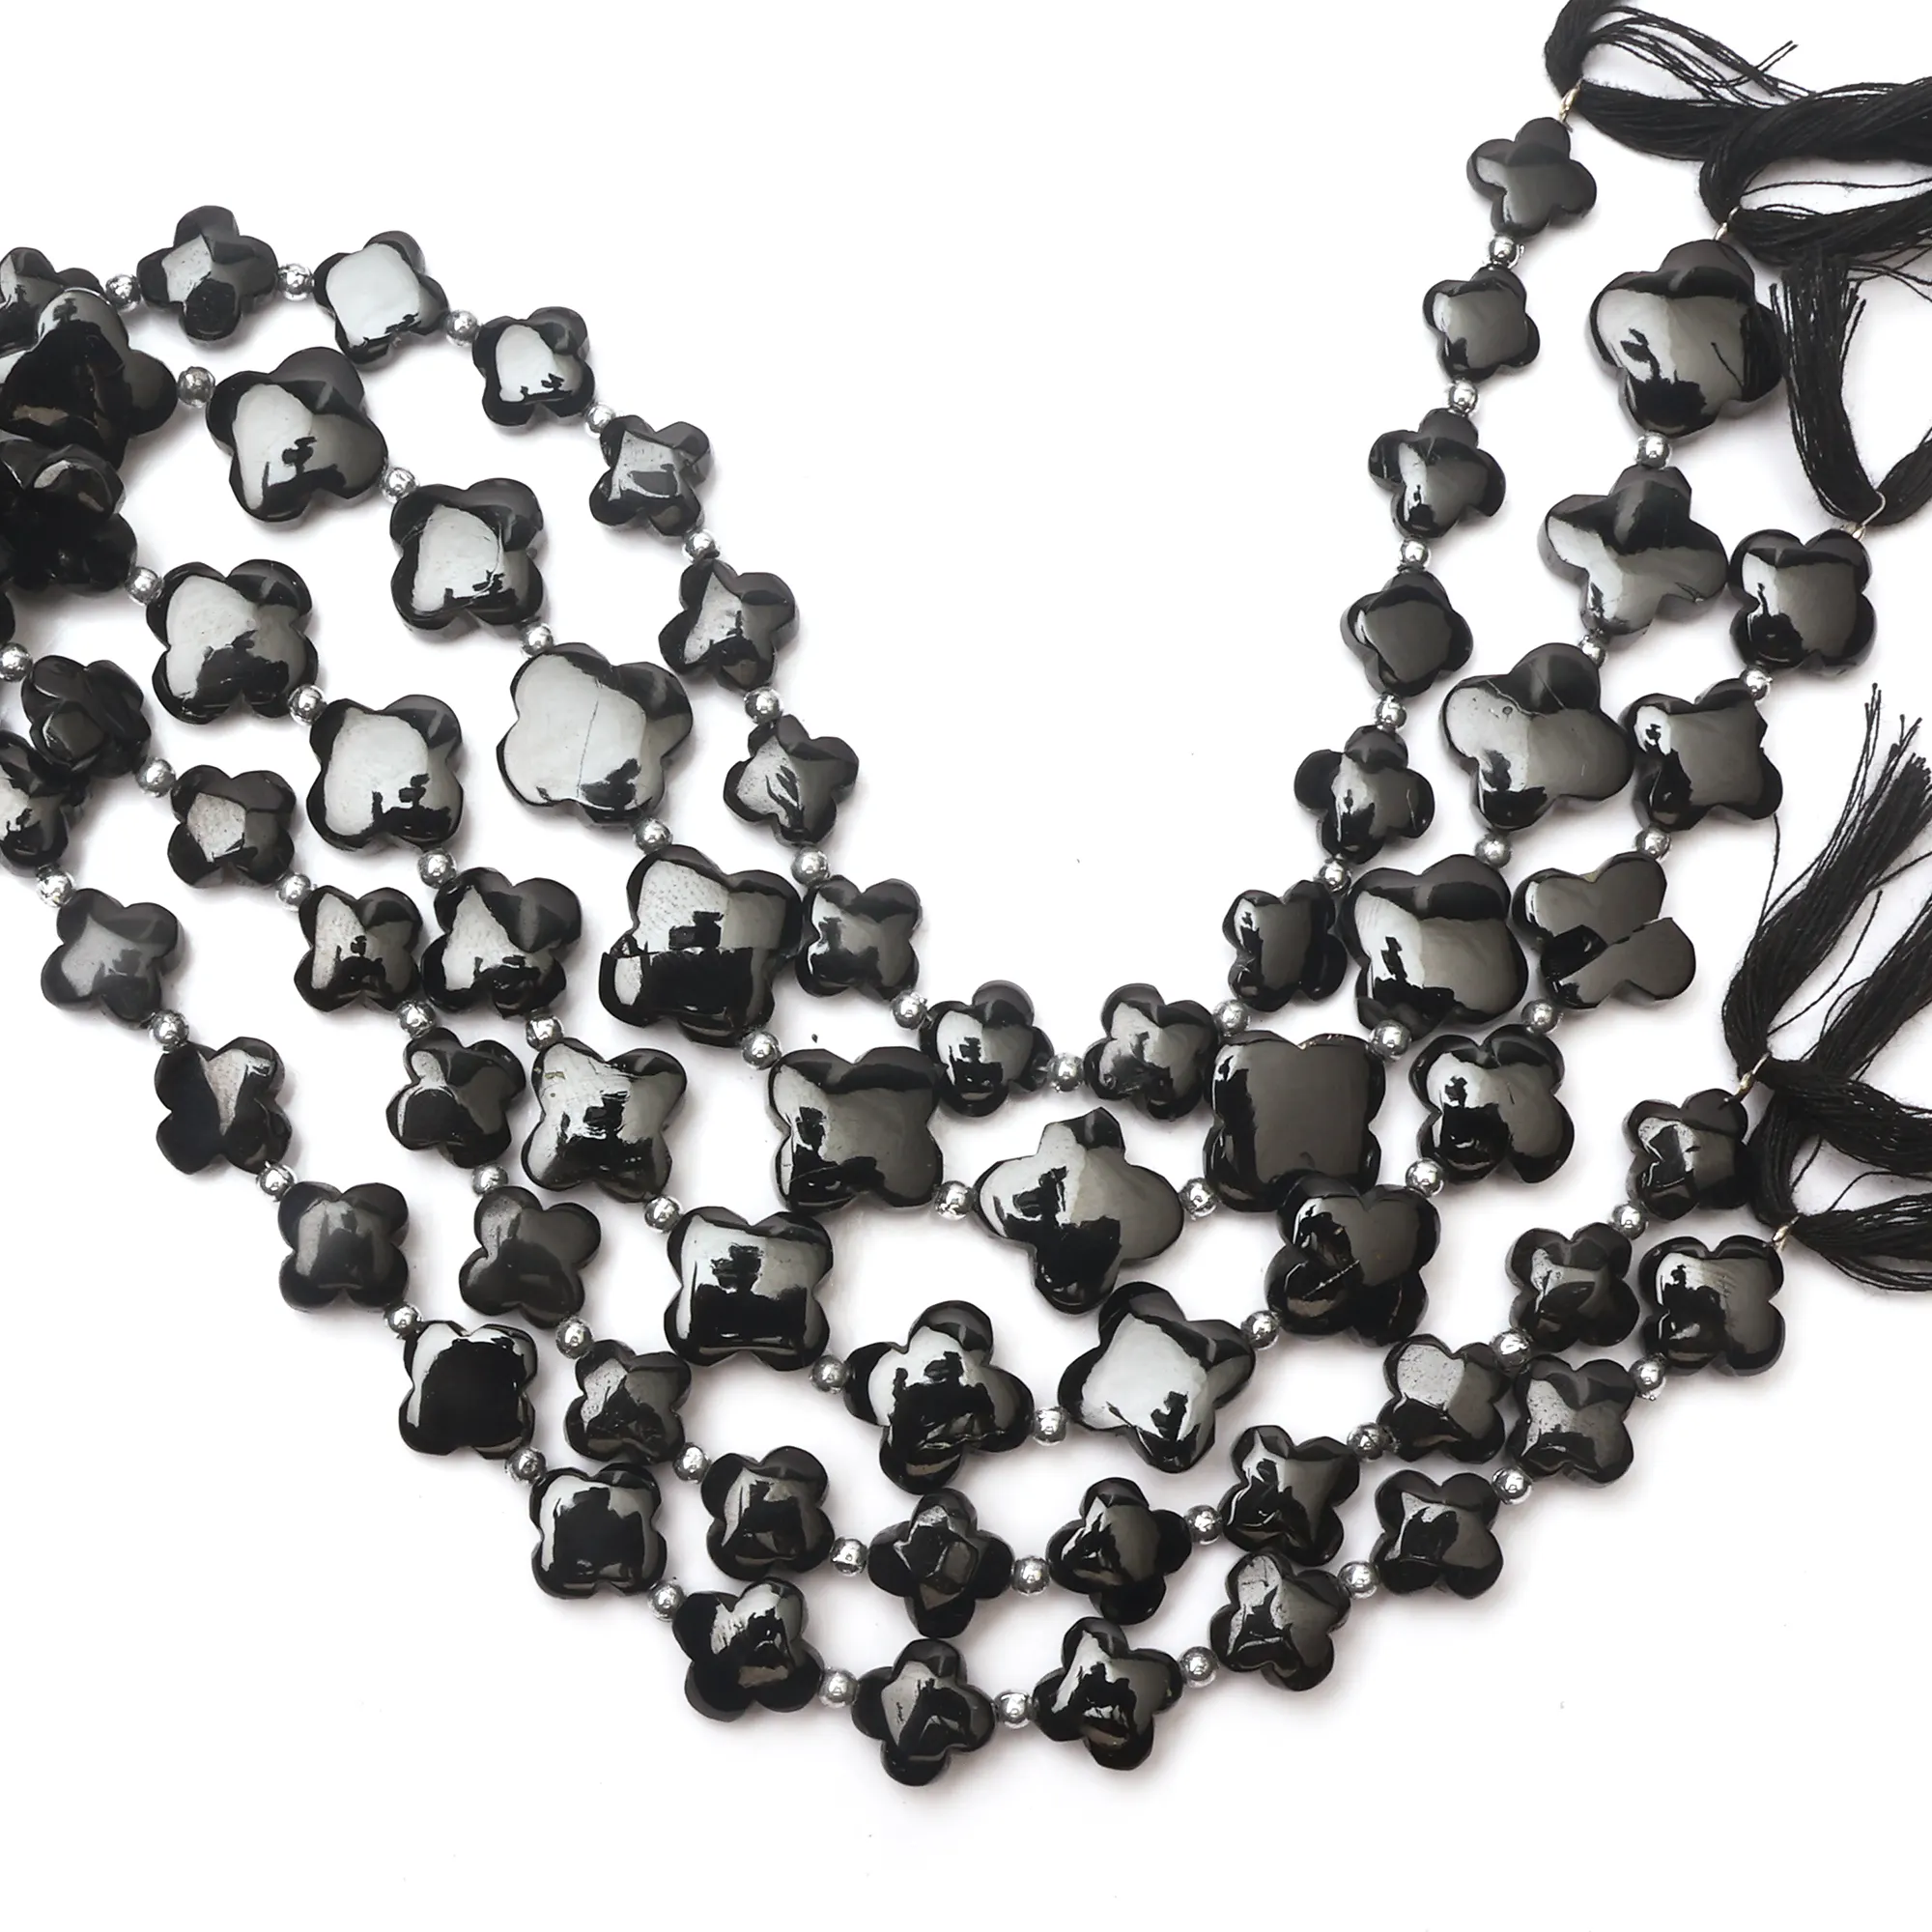 Natural Black Spinal Beads Clover Shape Smooth Center drilled Gemstone Beads Handmade For Jewelry Making